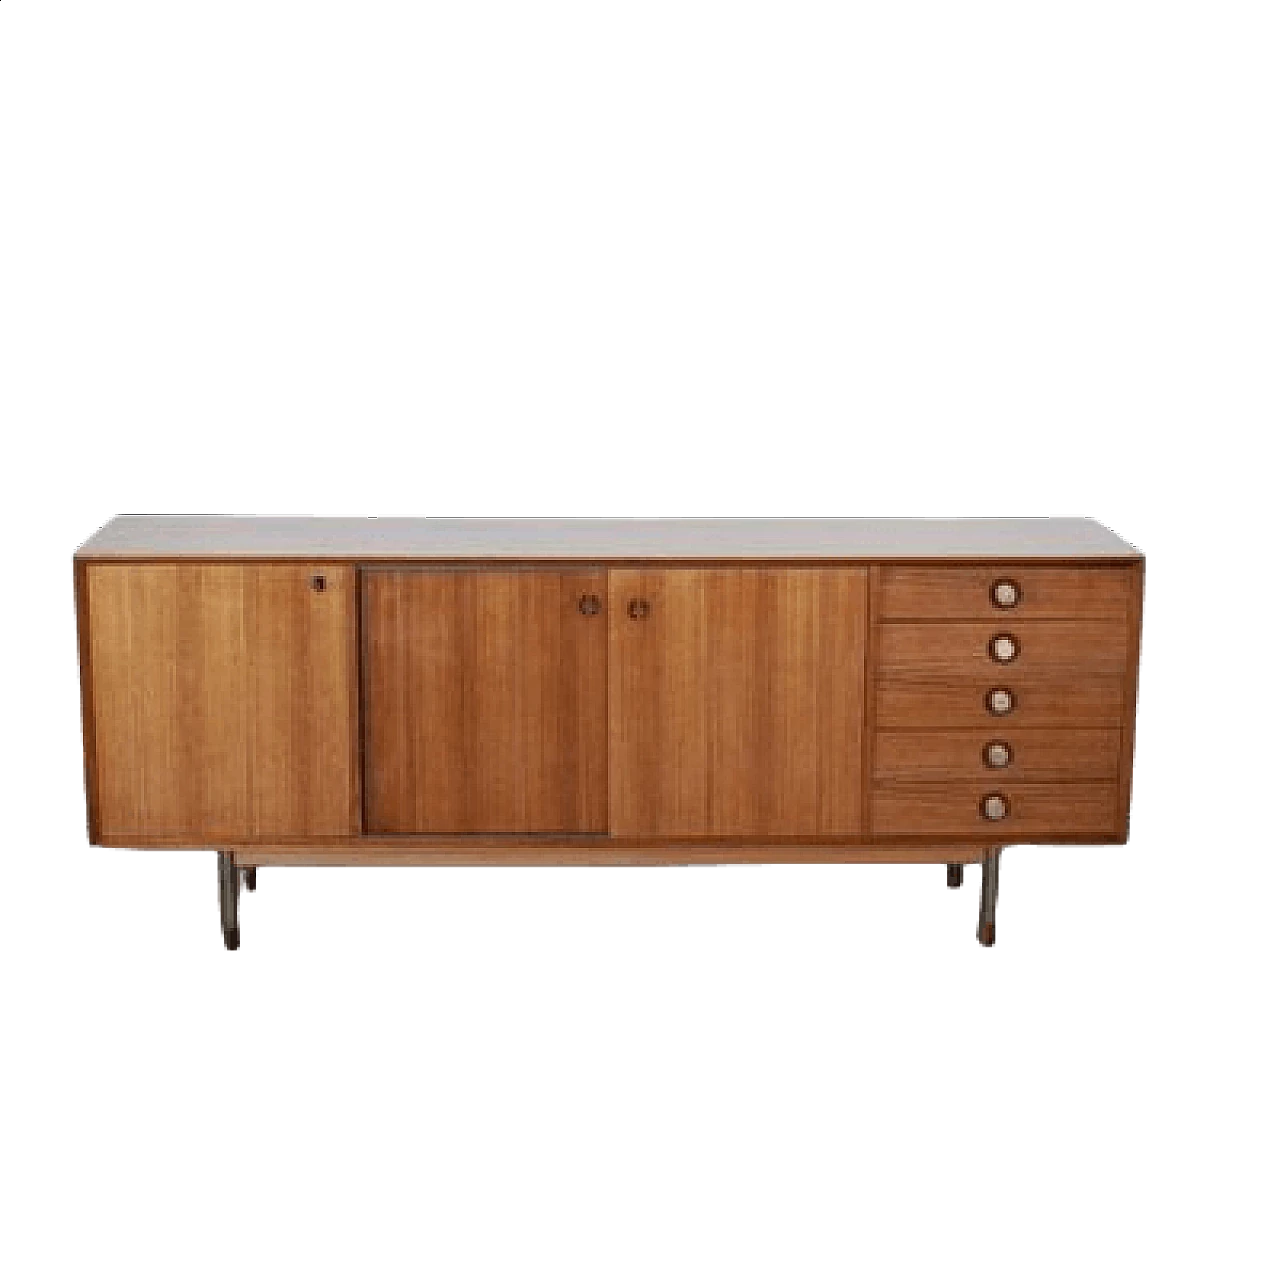 Walnut sideboard in the style of George Nelson, 1960s 1481400